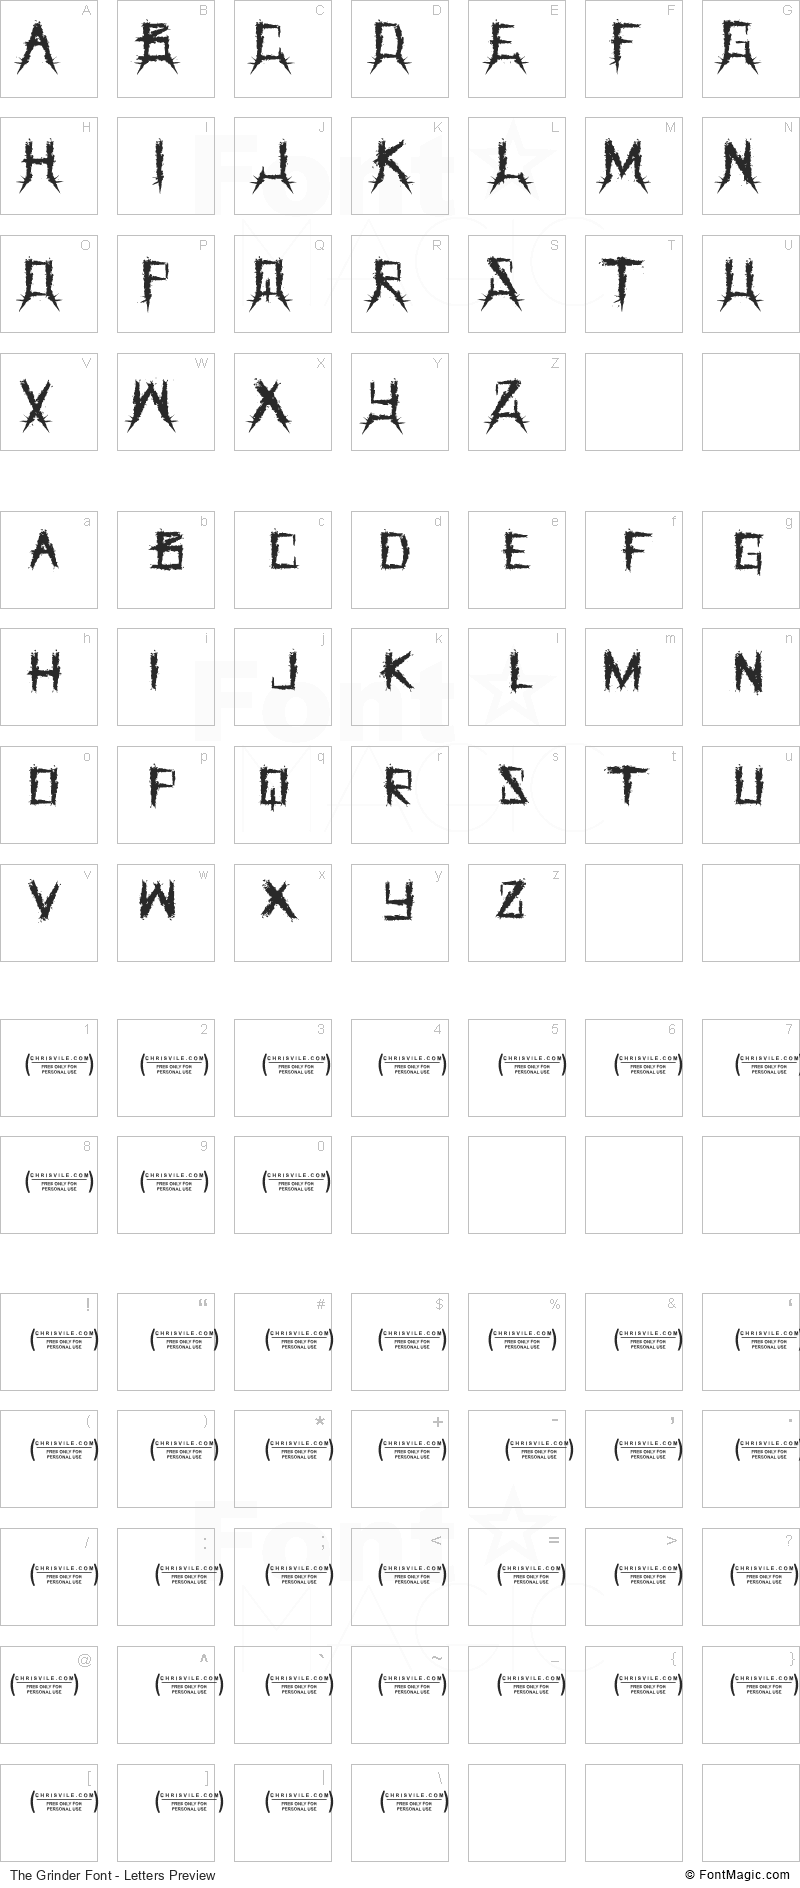 The Grinder Font - All Latters Preview Chart